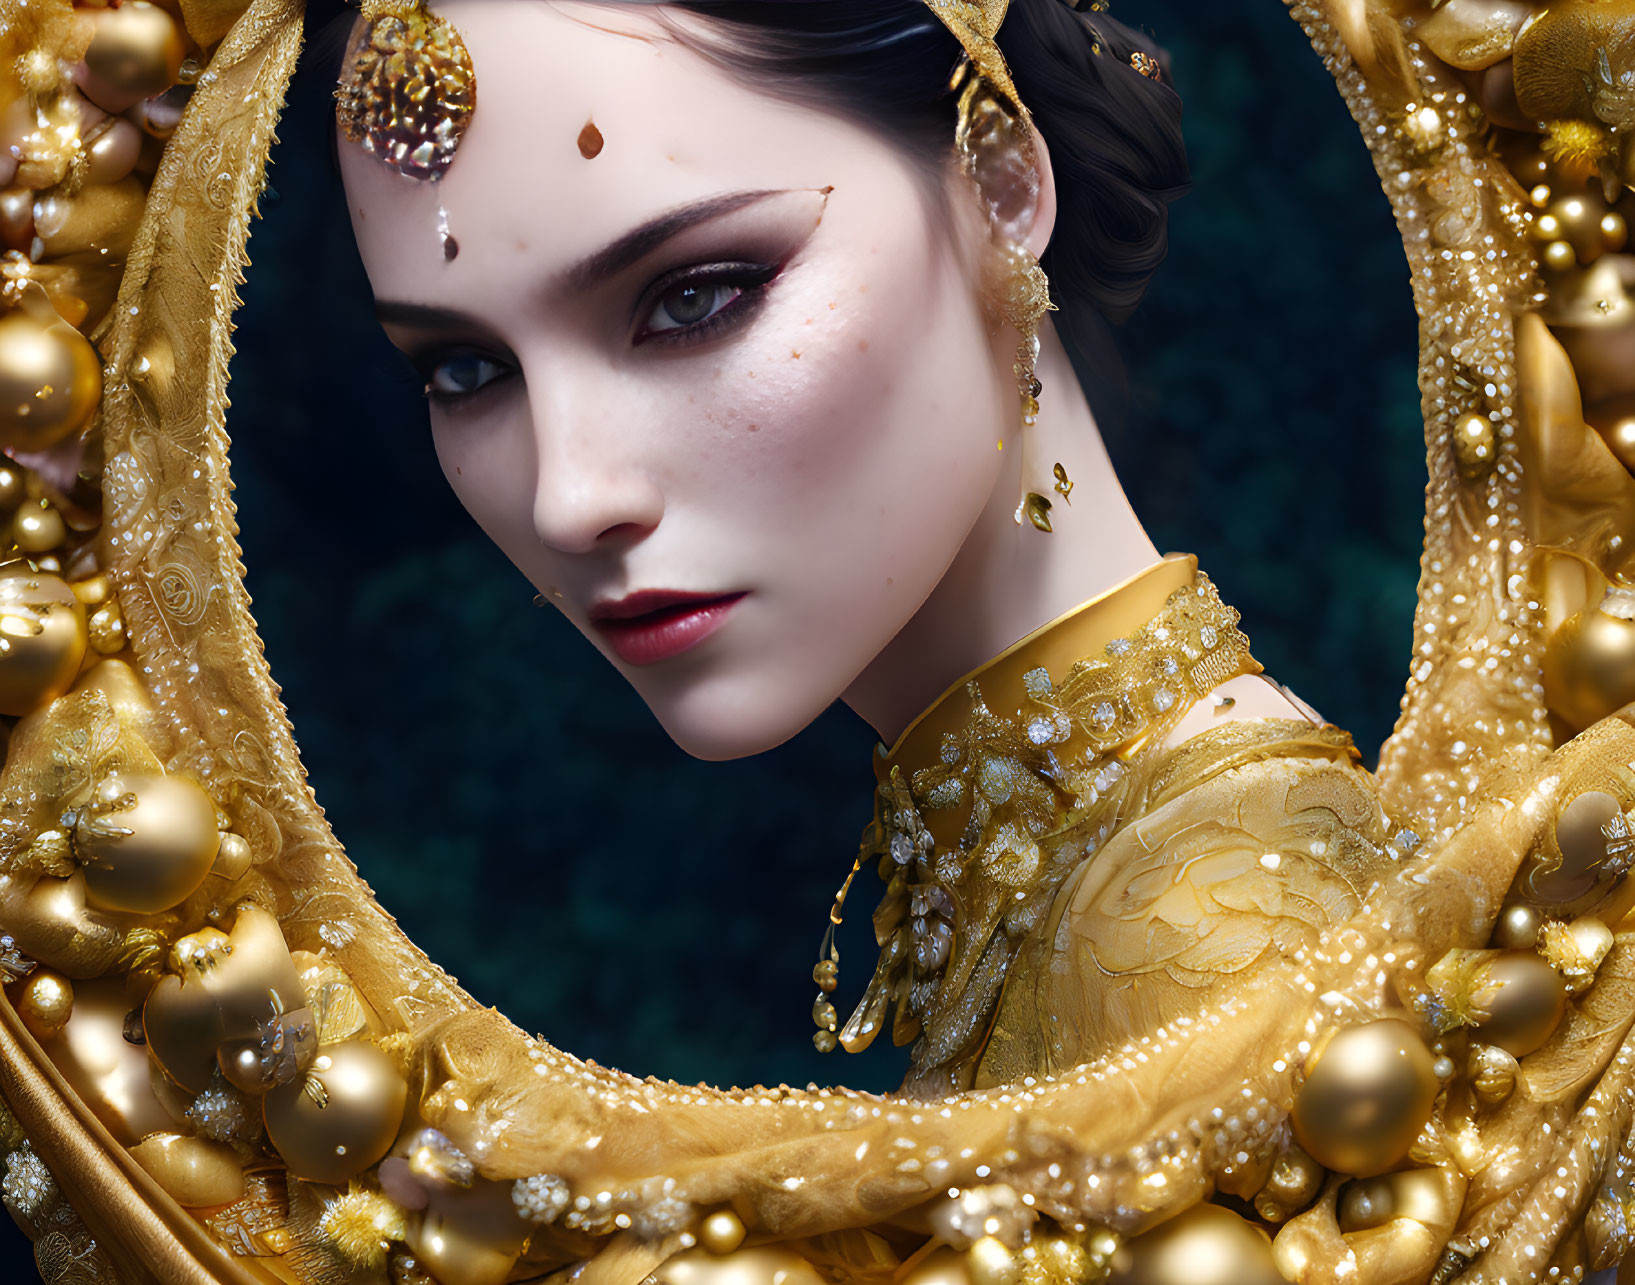 Golden jewelry adorned woman with bindi gazing intensely through ornate frame